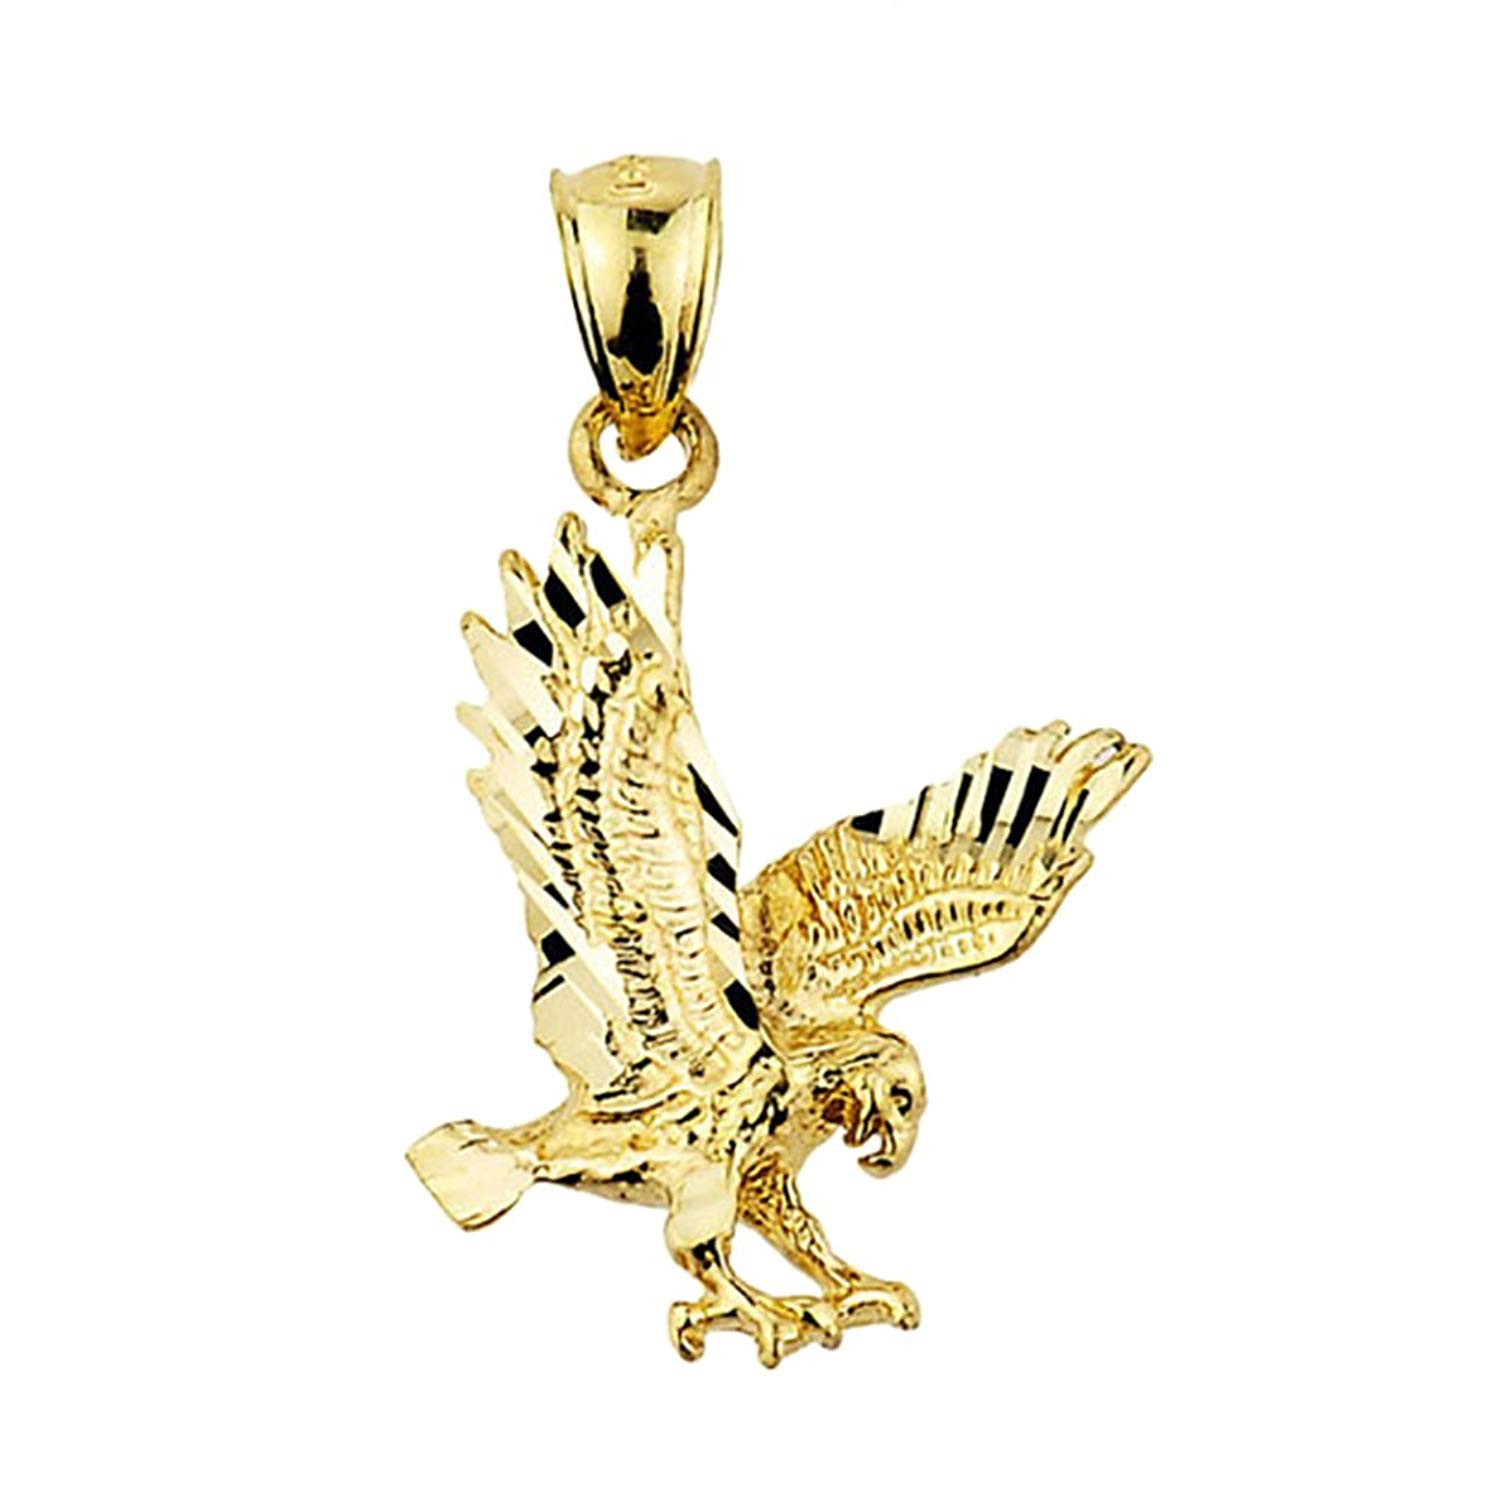 textured yellow gold landing eagle charm pendant tablet accent jewelry patio dining sets with umbrella entryway mirror kitchen pulls anchor table lamp skinny side drawer small